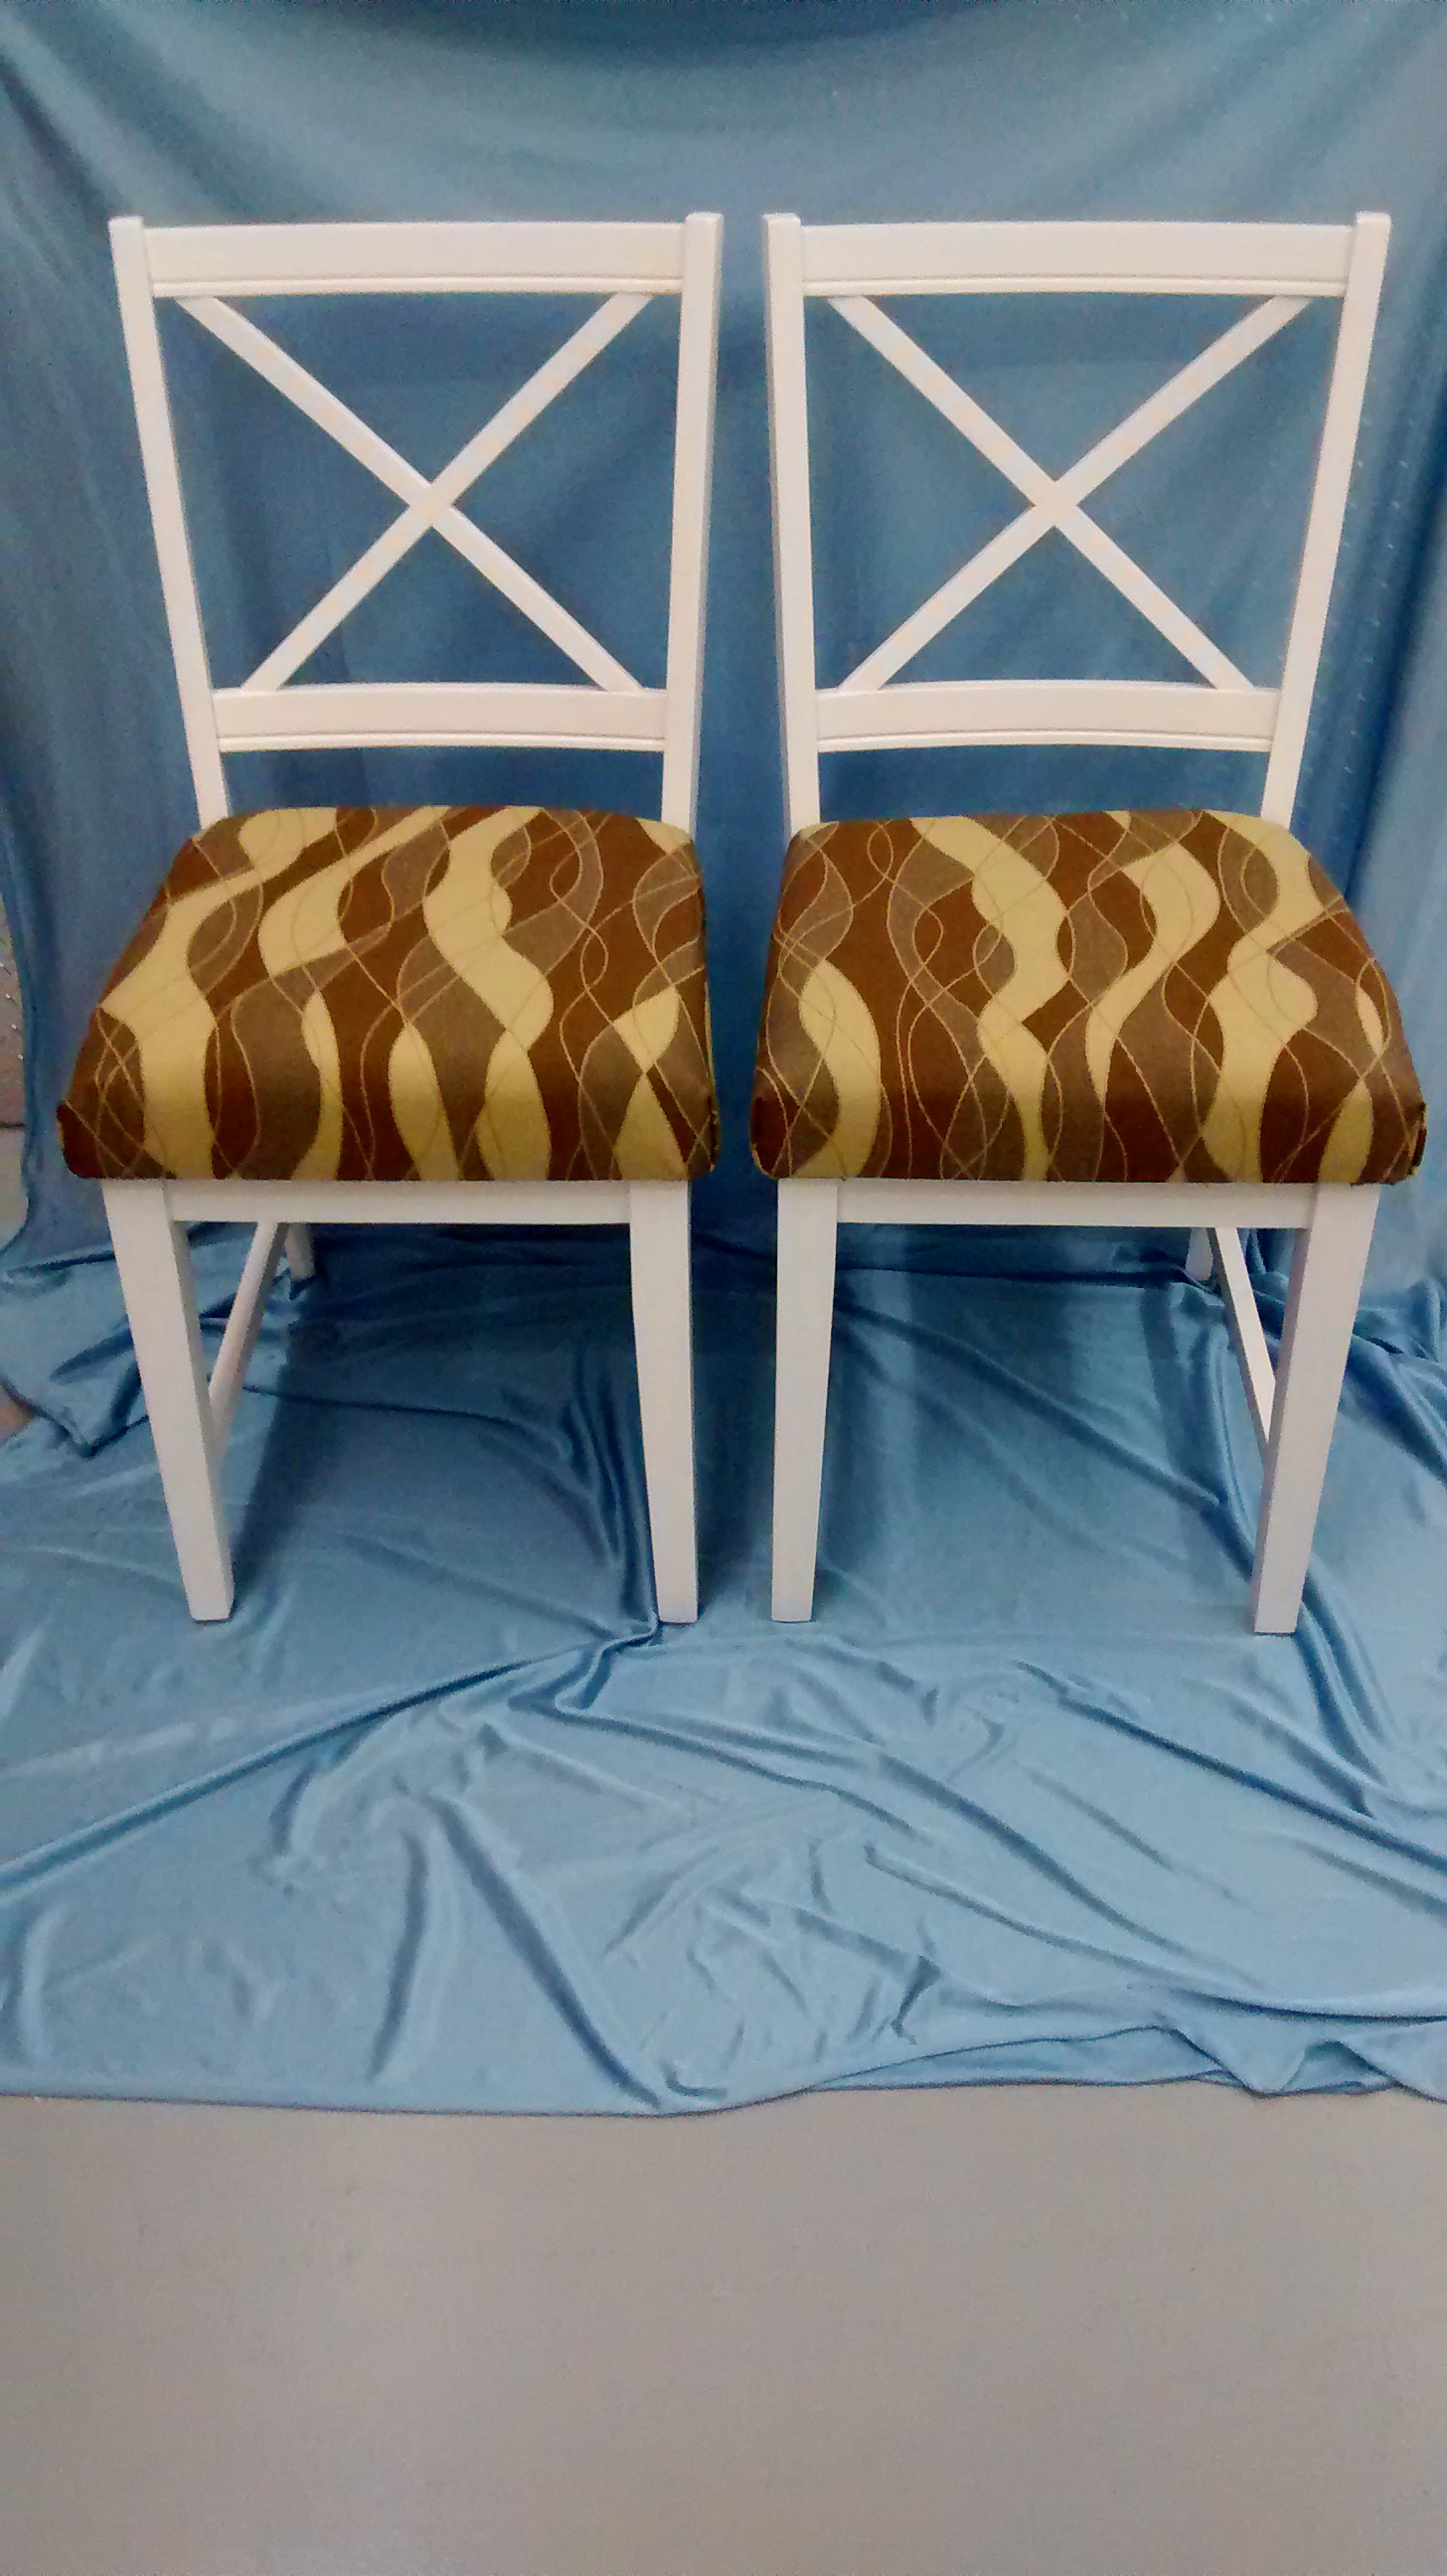 Pair of Wooden Chairs with New Comfy Cushions